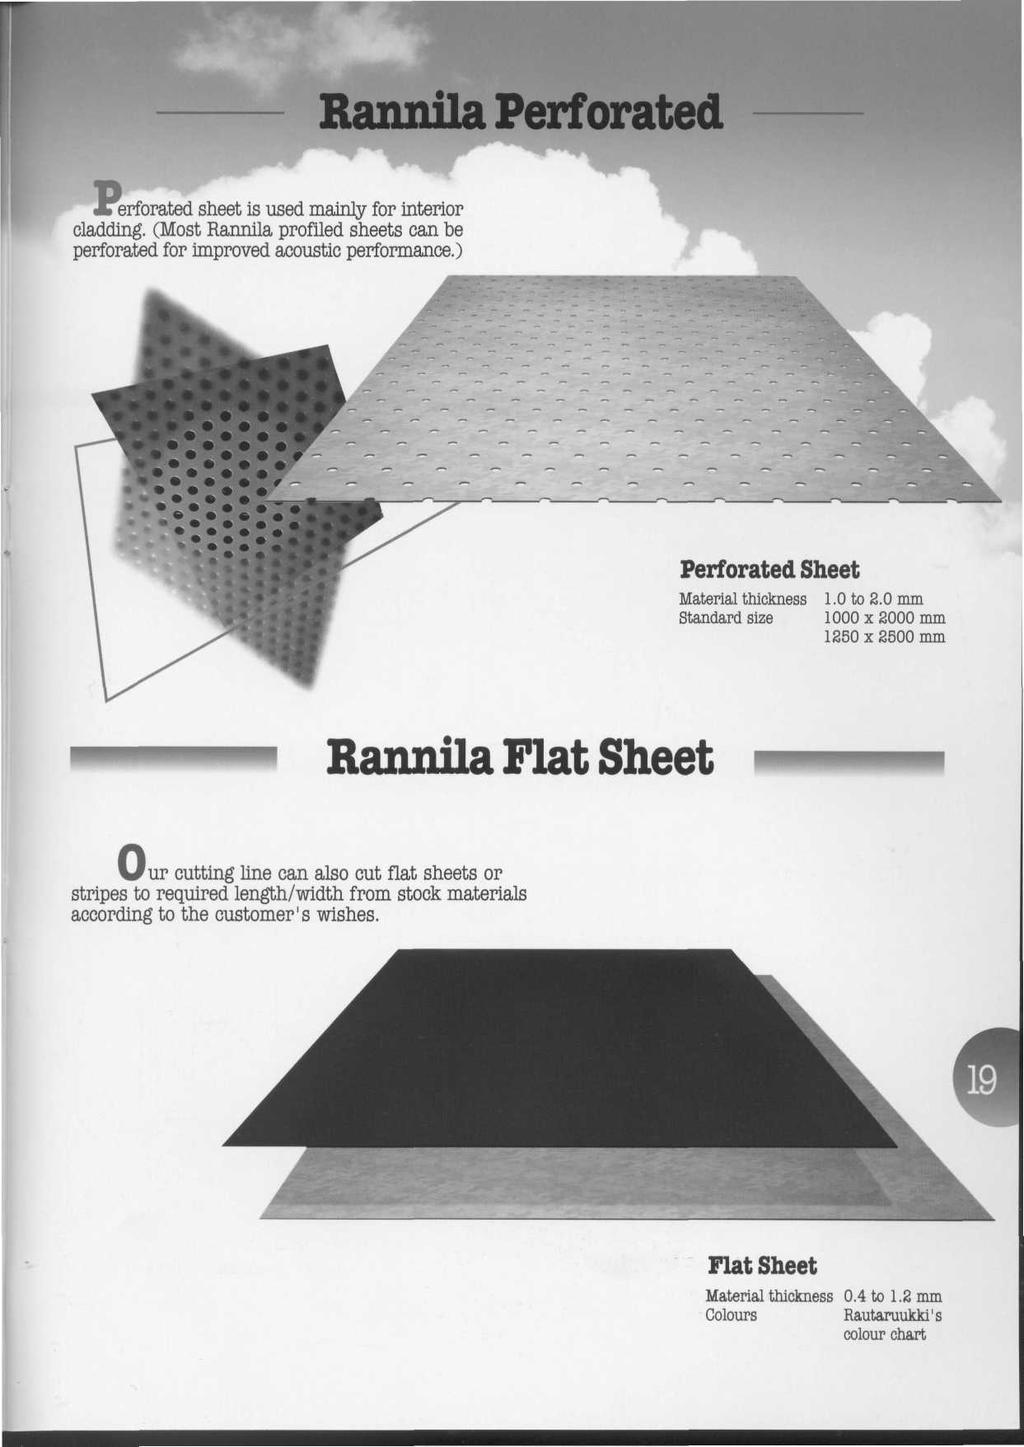 Rannila Perforated JTerforated sheet is used mainly for interior cladding. (Most Rannila profiled sheets can be perforated for improved acoustic performance.